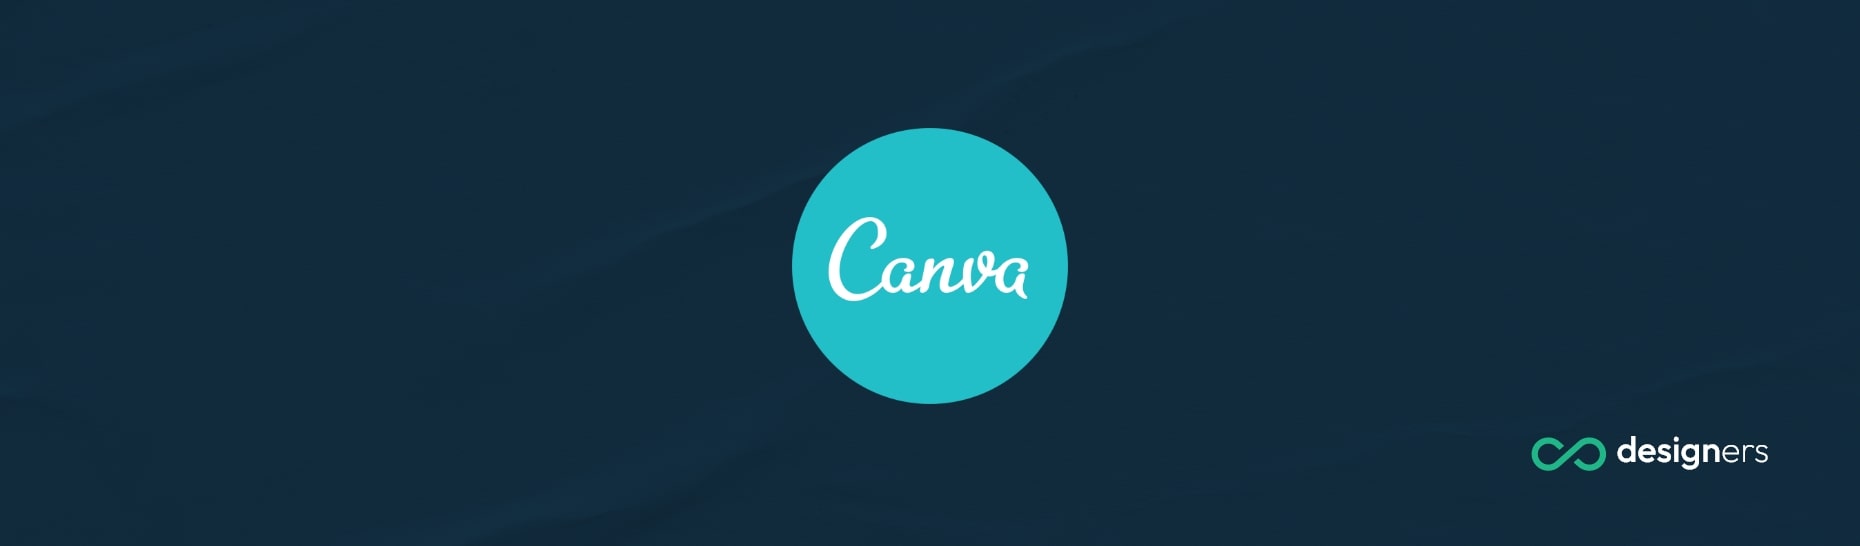 What are good fonts tips for Canva?